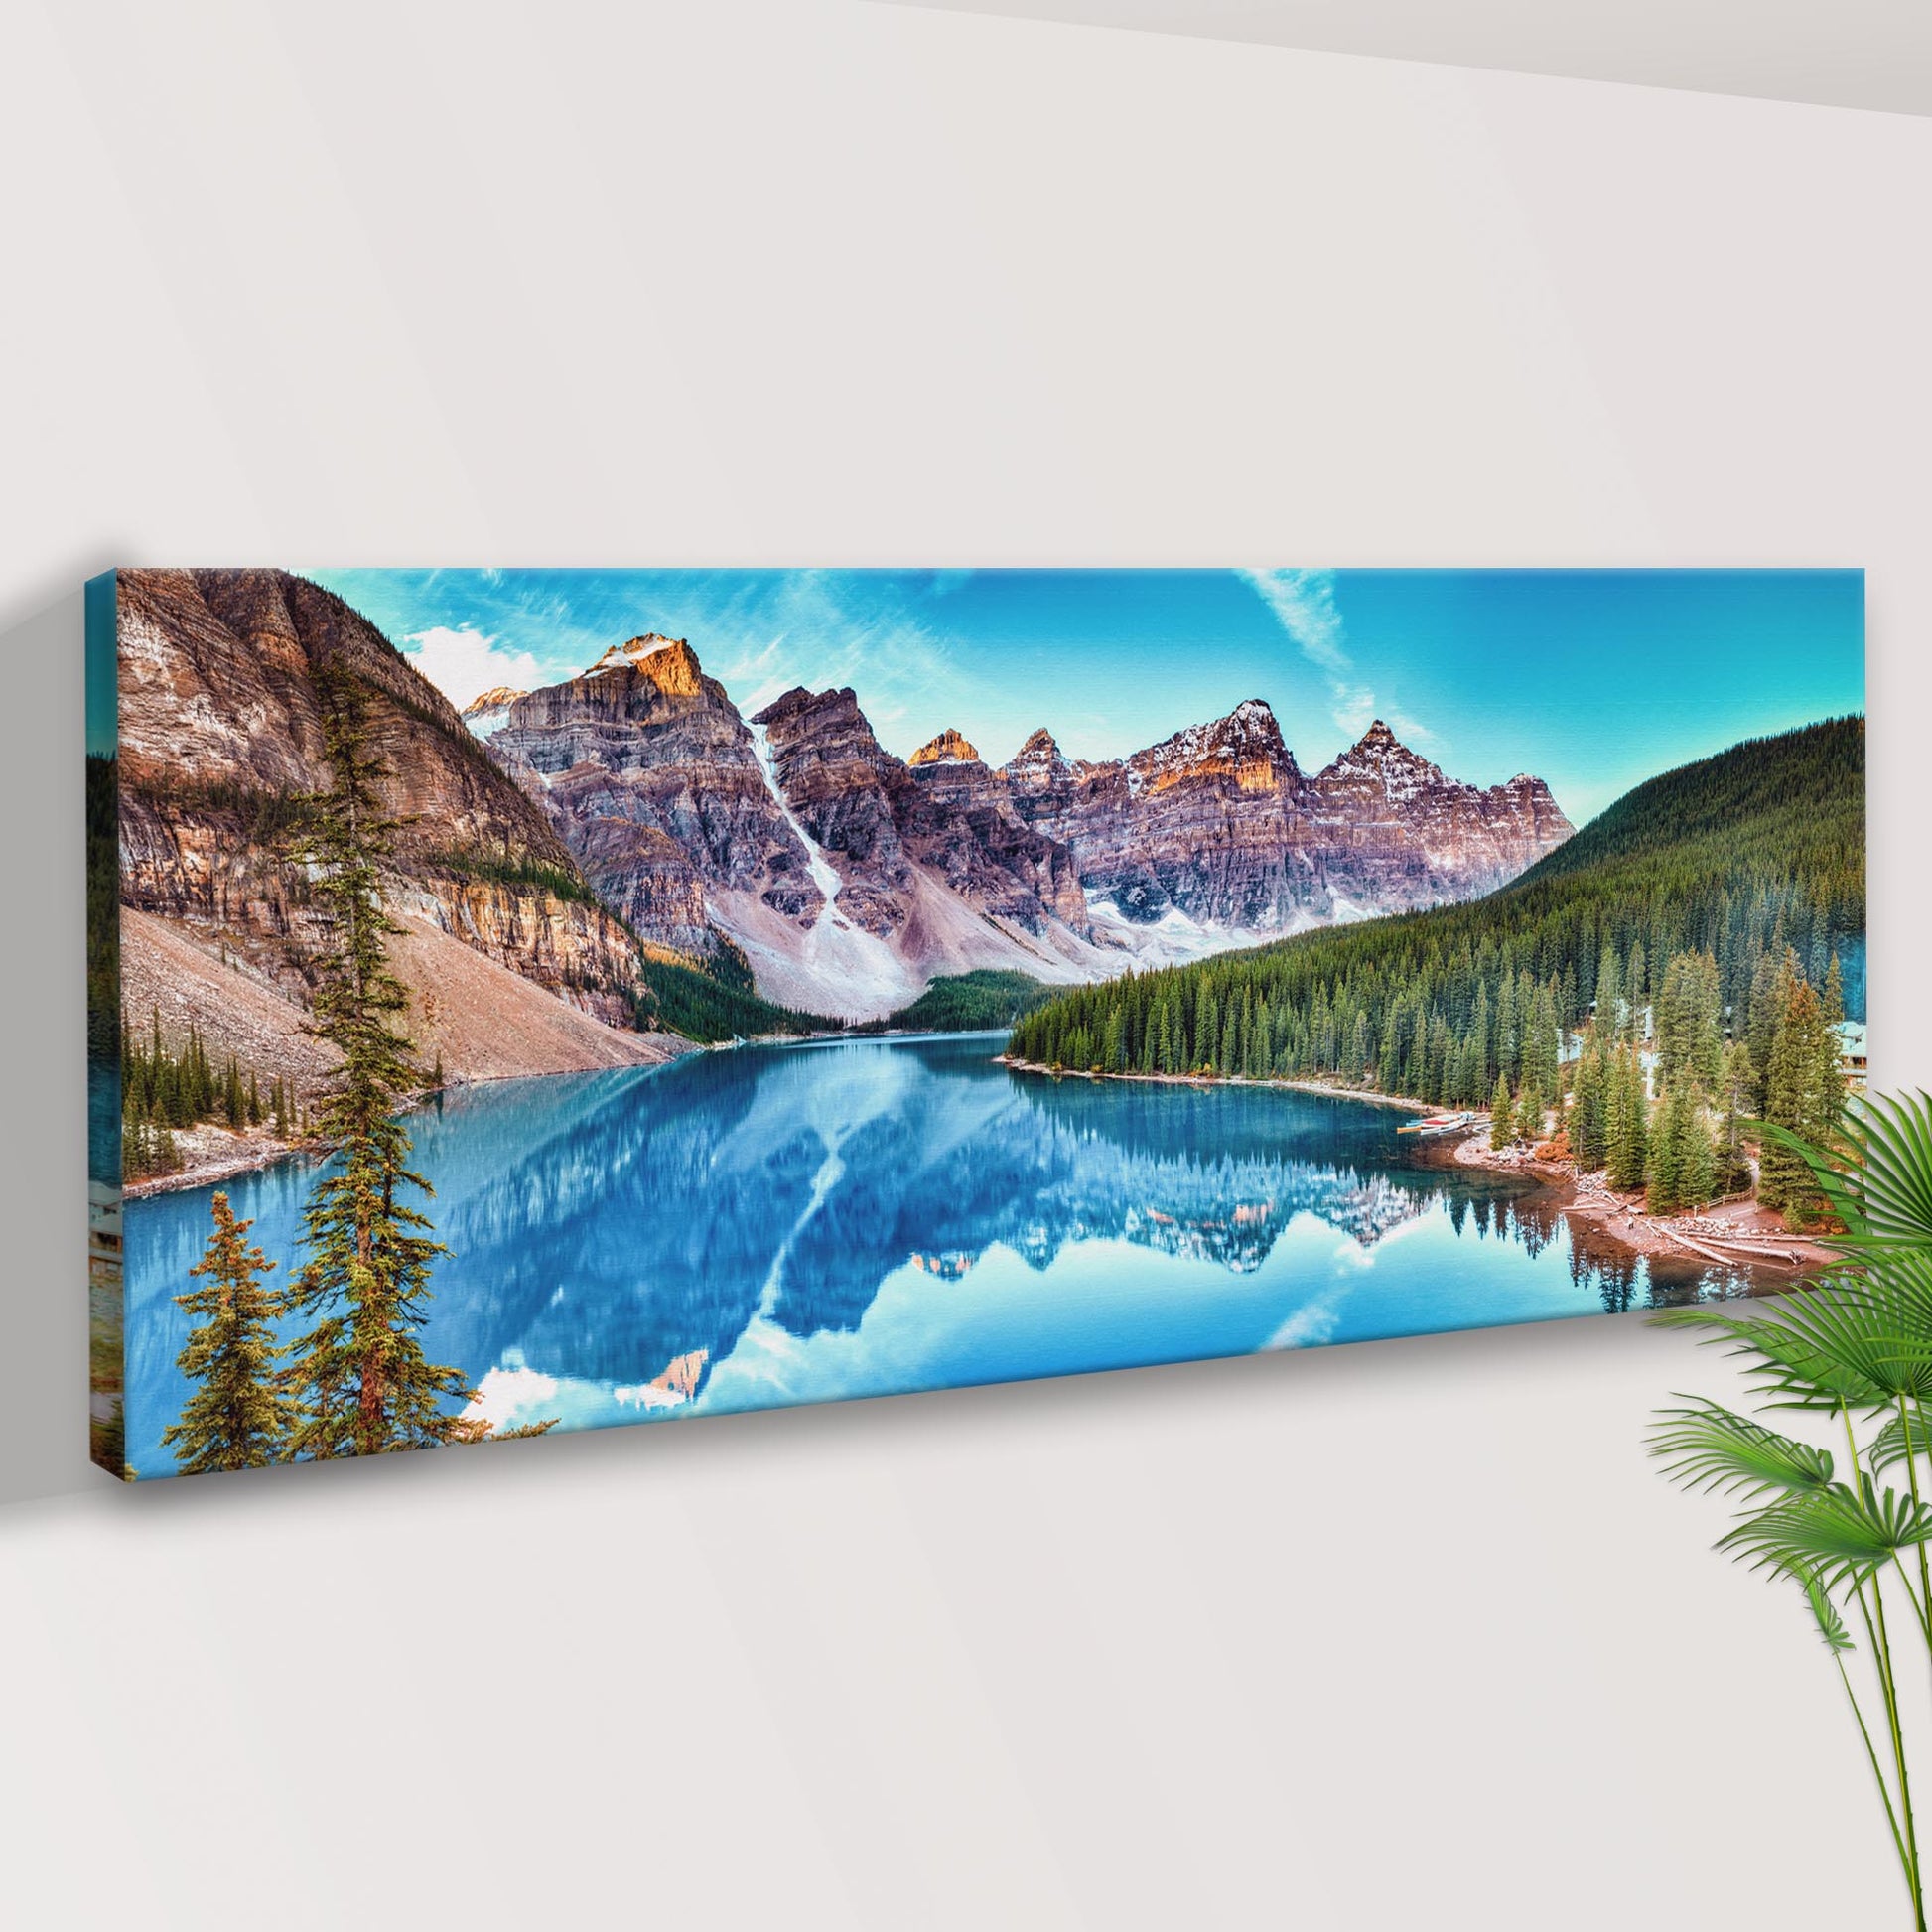 Moraine Lake In Banff National Park Canvas Wall Art Style 1 - Image by Tailored Canvases